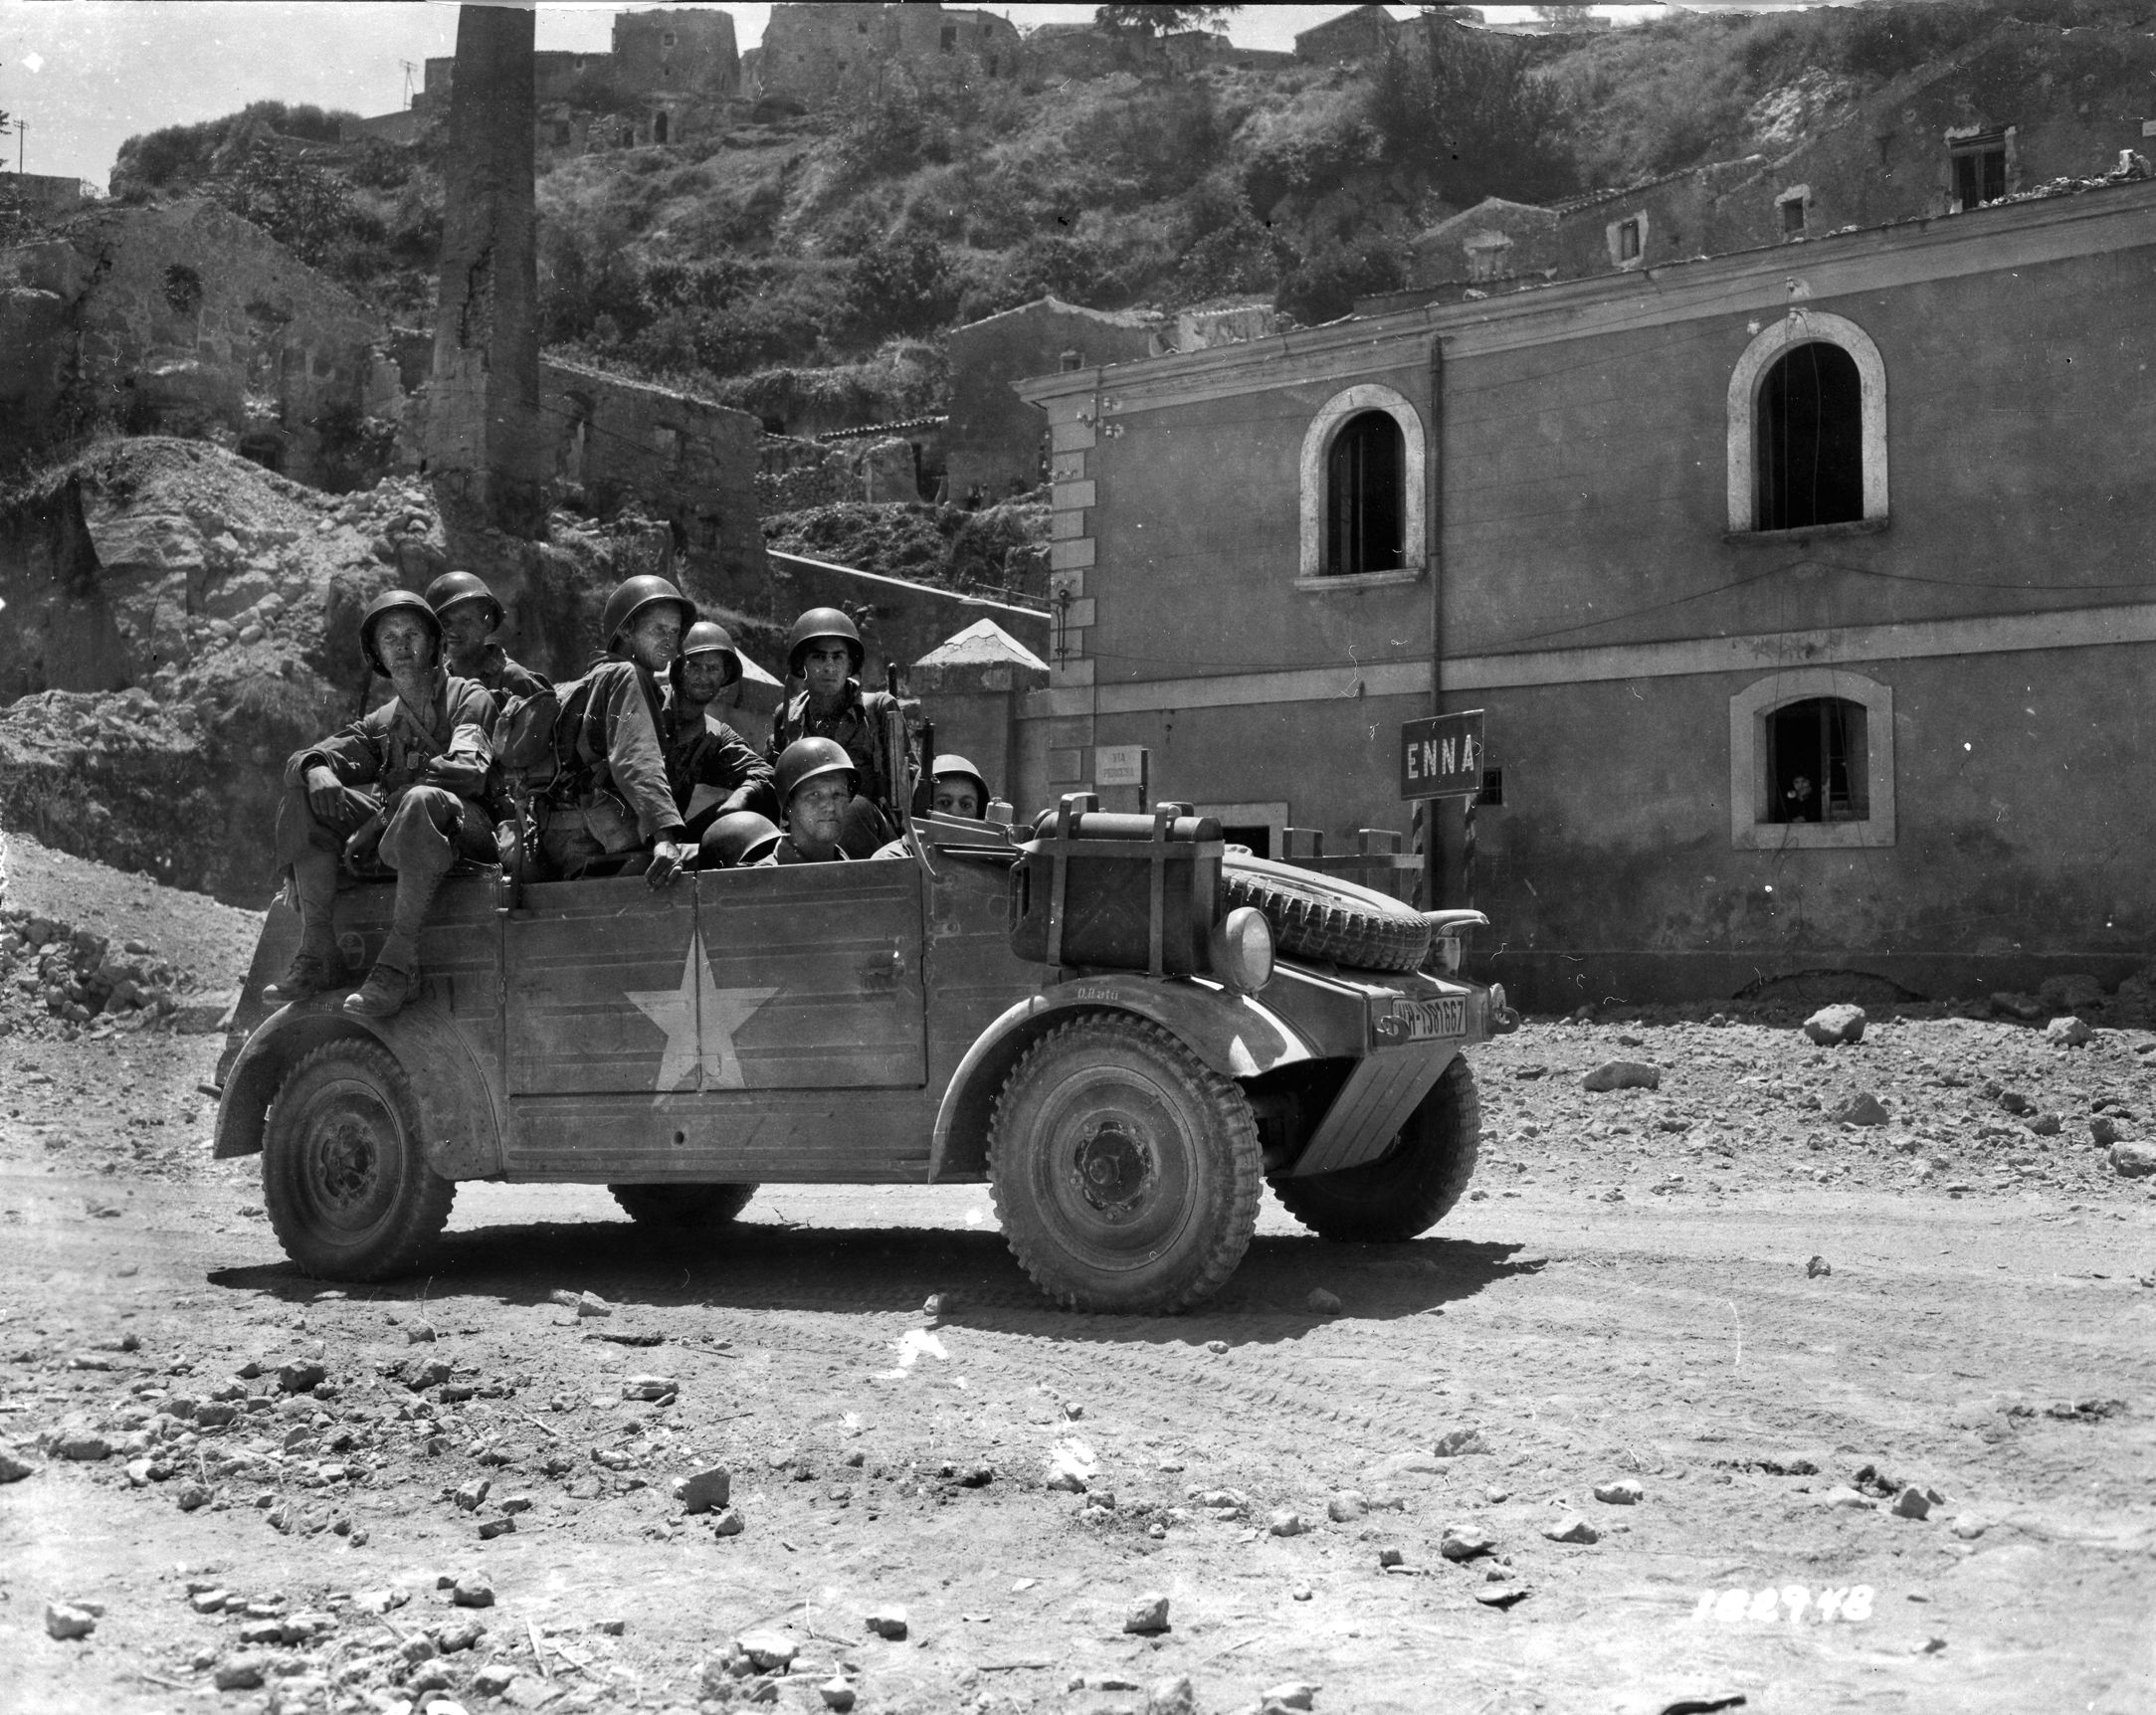 After taking the town of Enna, Sicily, on July 20, 1943, American soldiers of Company I, 1st Infantry Division ride through the town in a captured German vehicle that has been emblazoned with the U.S. star insignia. 